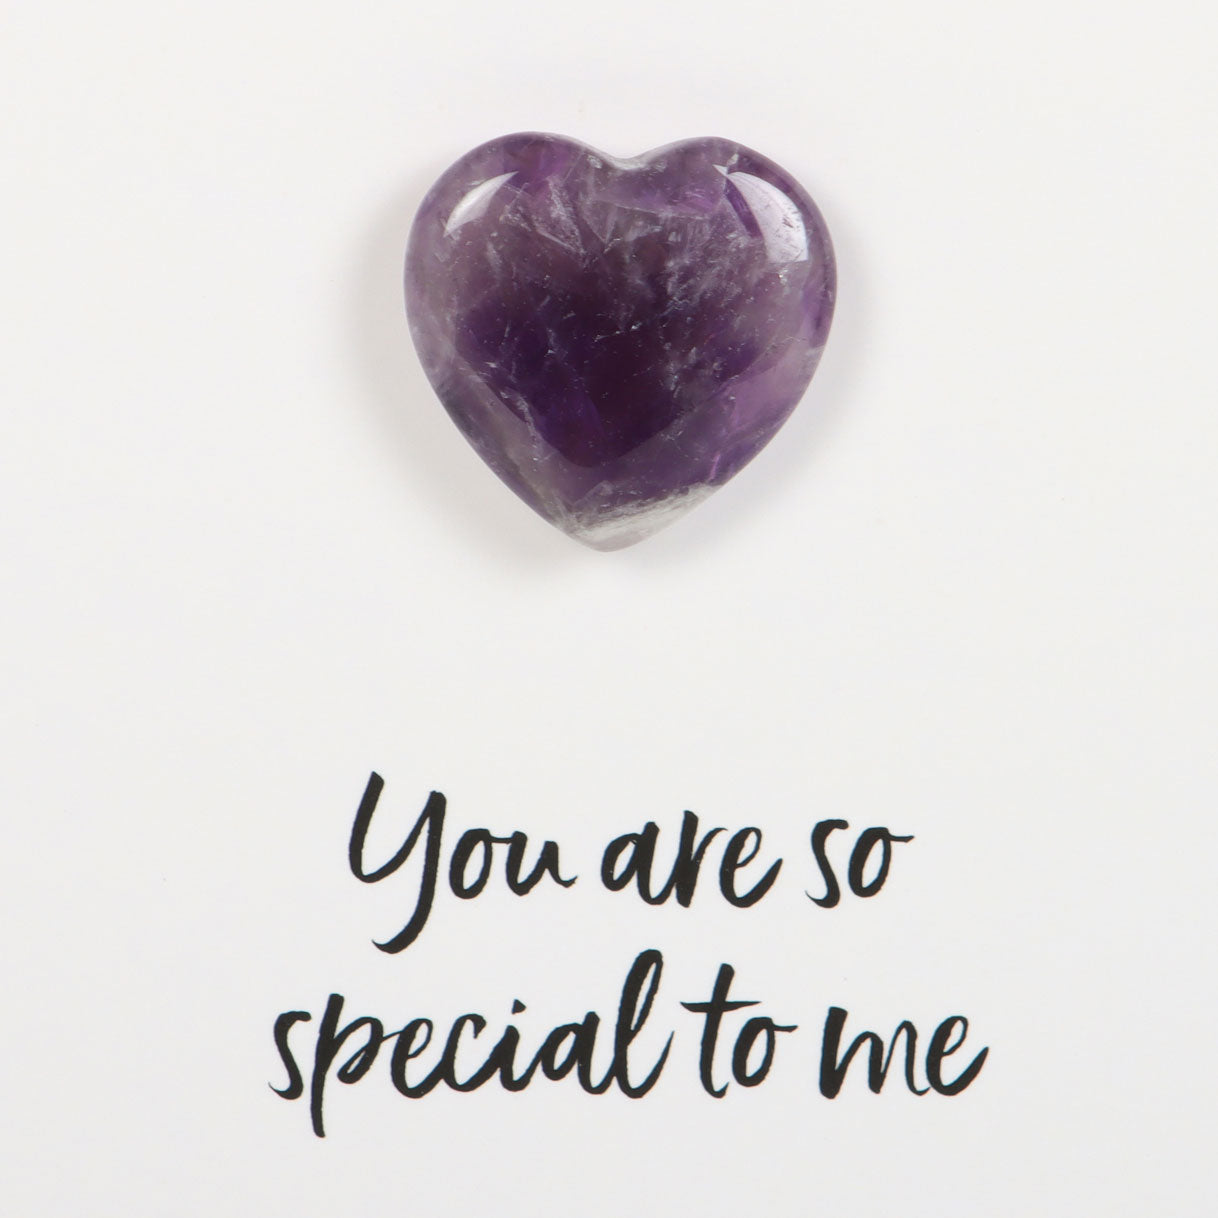 Crystal heart greeting cards